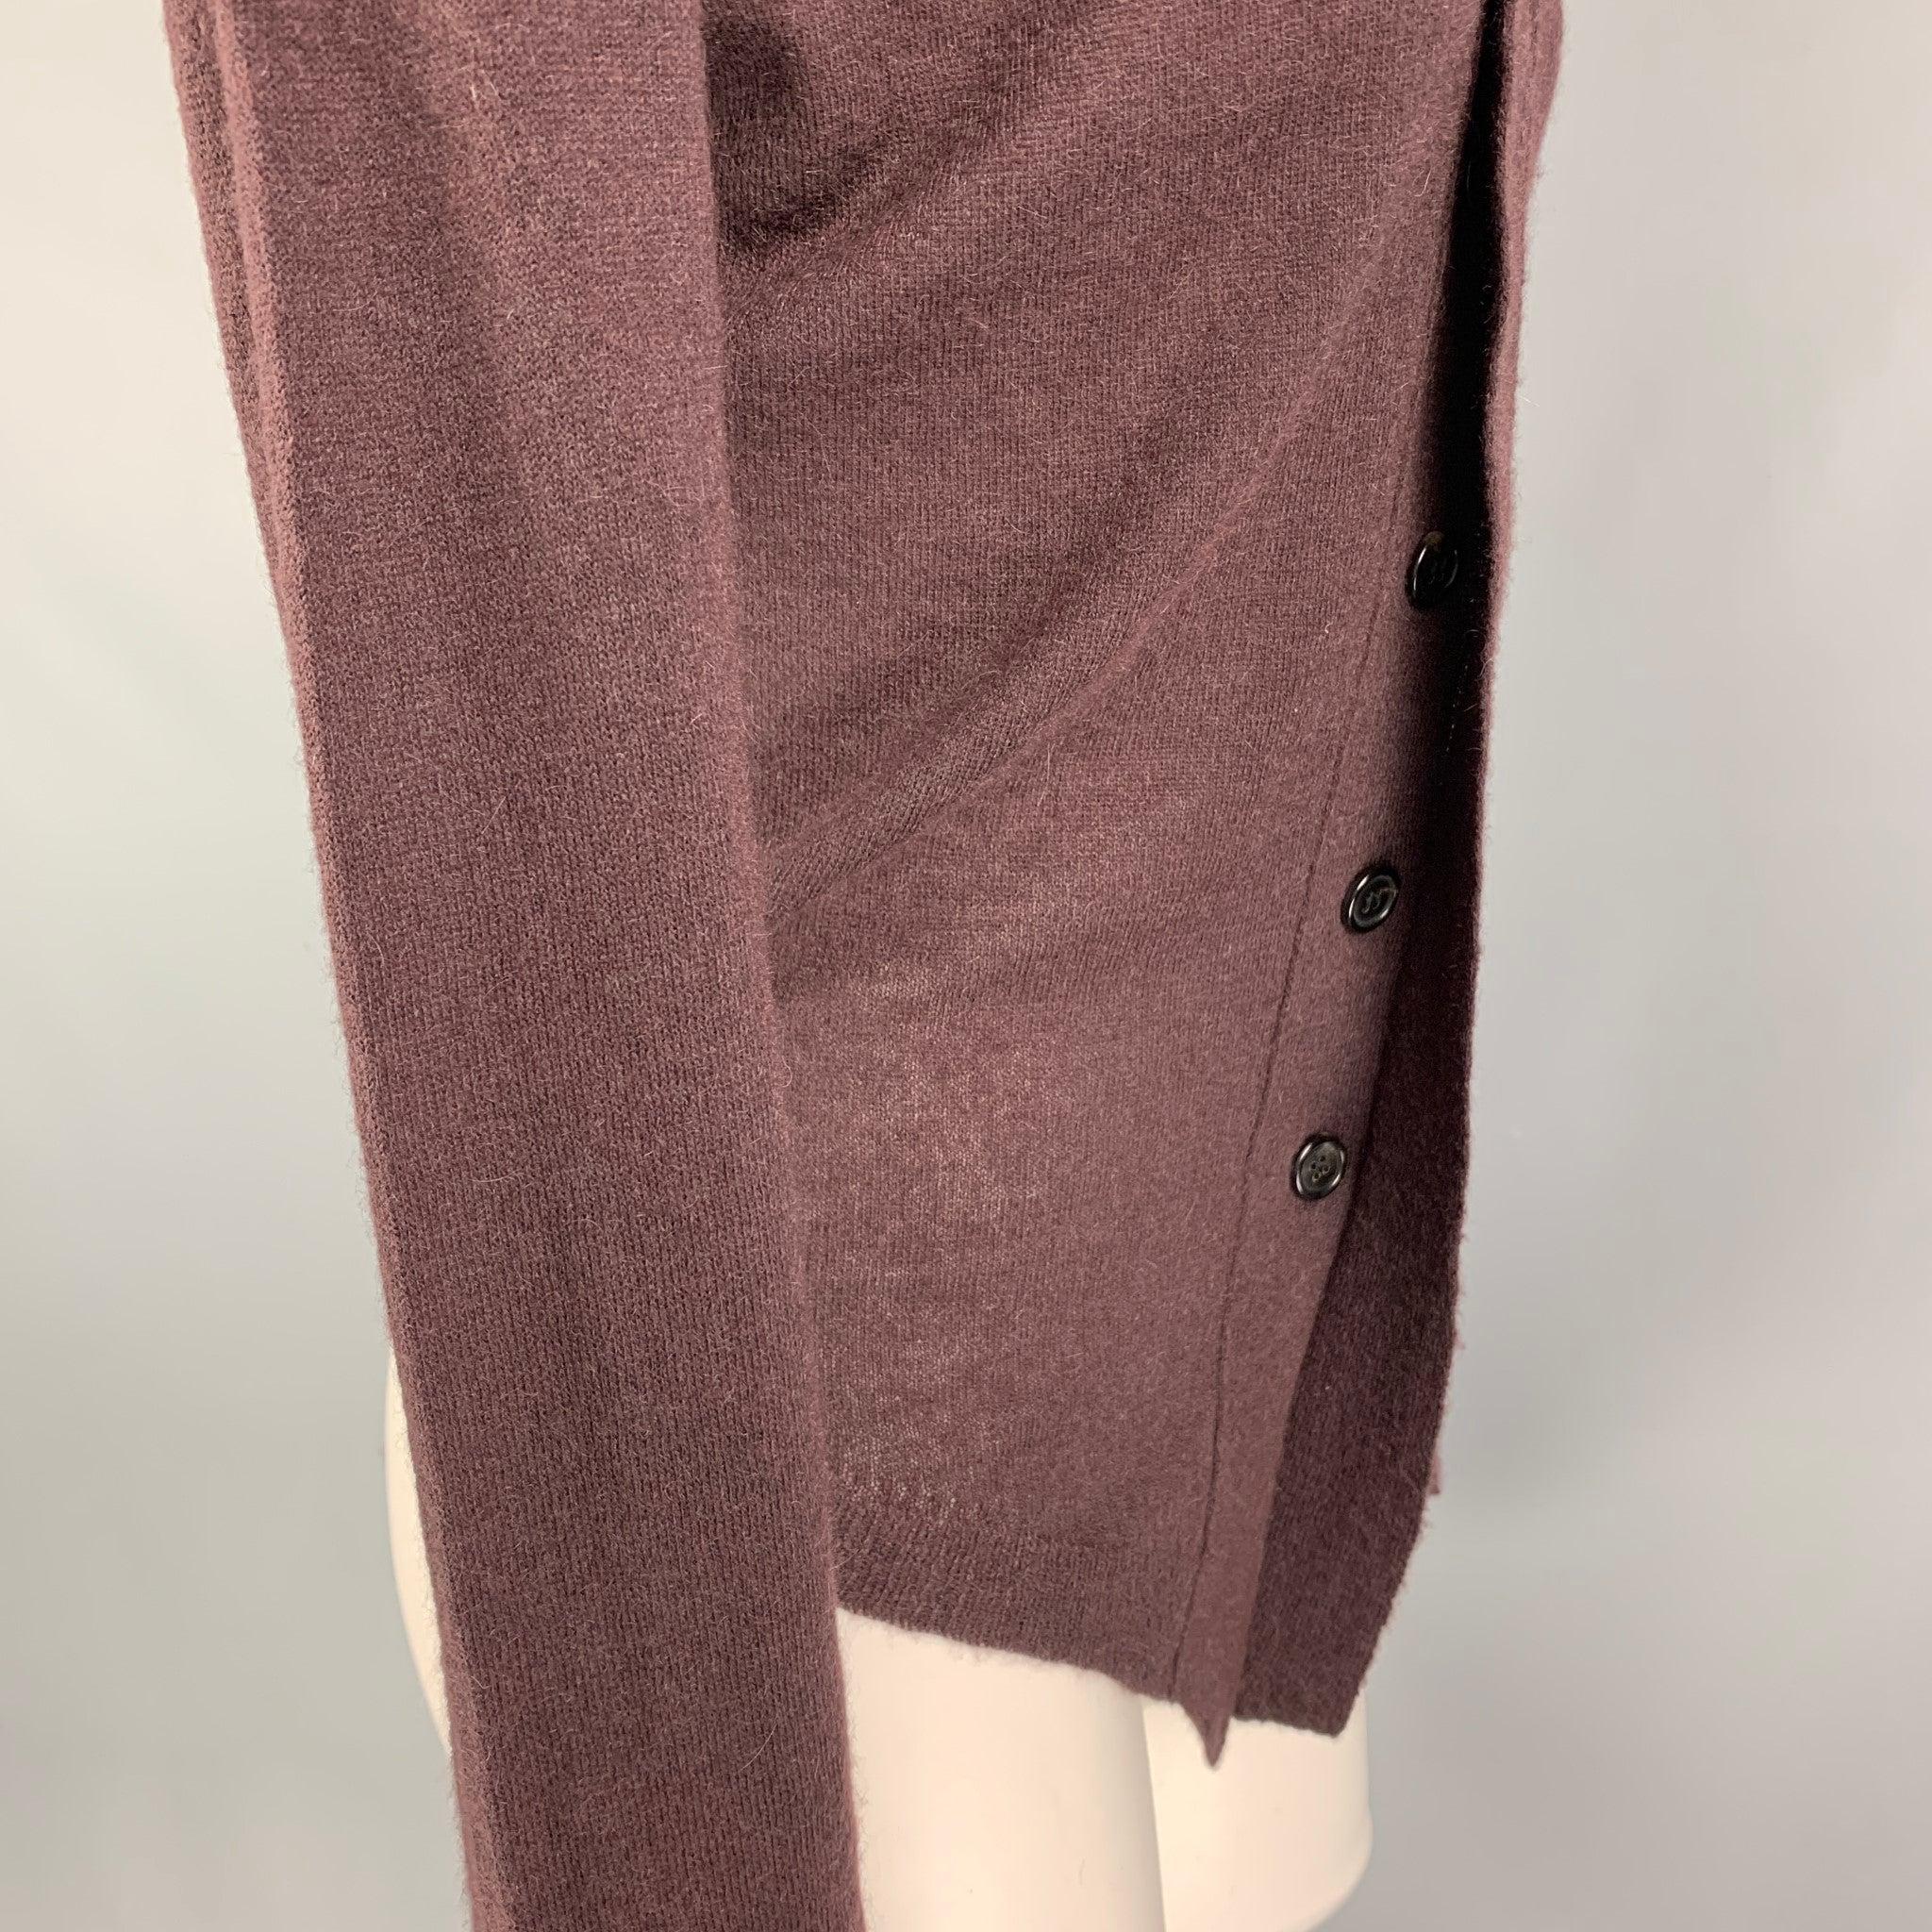 ANN DEMEULEMEESTER cardigan comes in a burgundy knitted cashmere blend featuring a shawl collar and a hidden placket closure.
Excellent
Pre-Owned Condition. 

Marked:   38 

Measurements: 
 
Shoulder: 15.5 inches Bust: 36 inches Sleeve:
32.5 inches